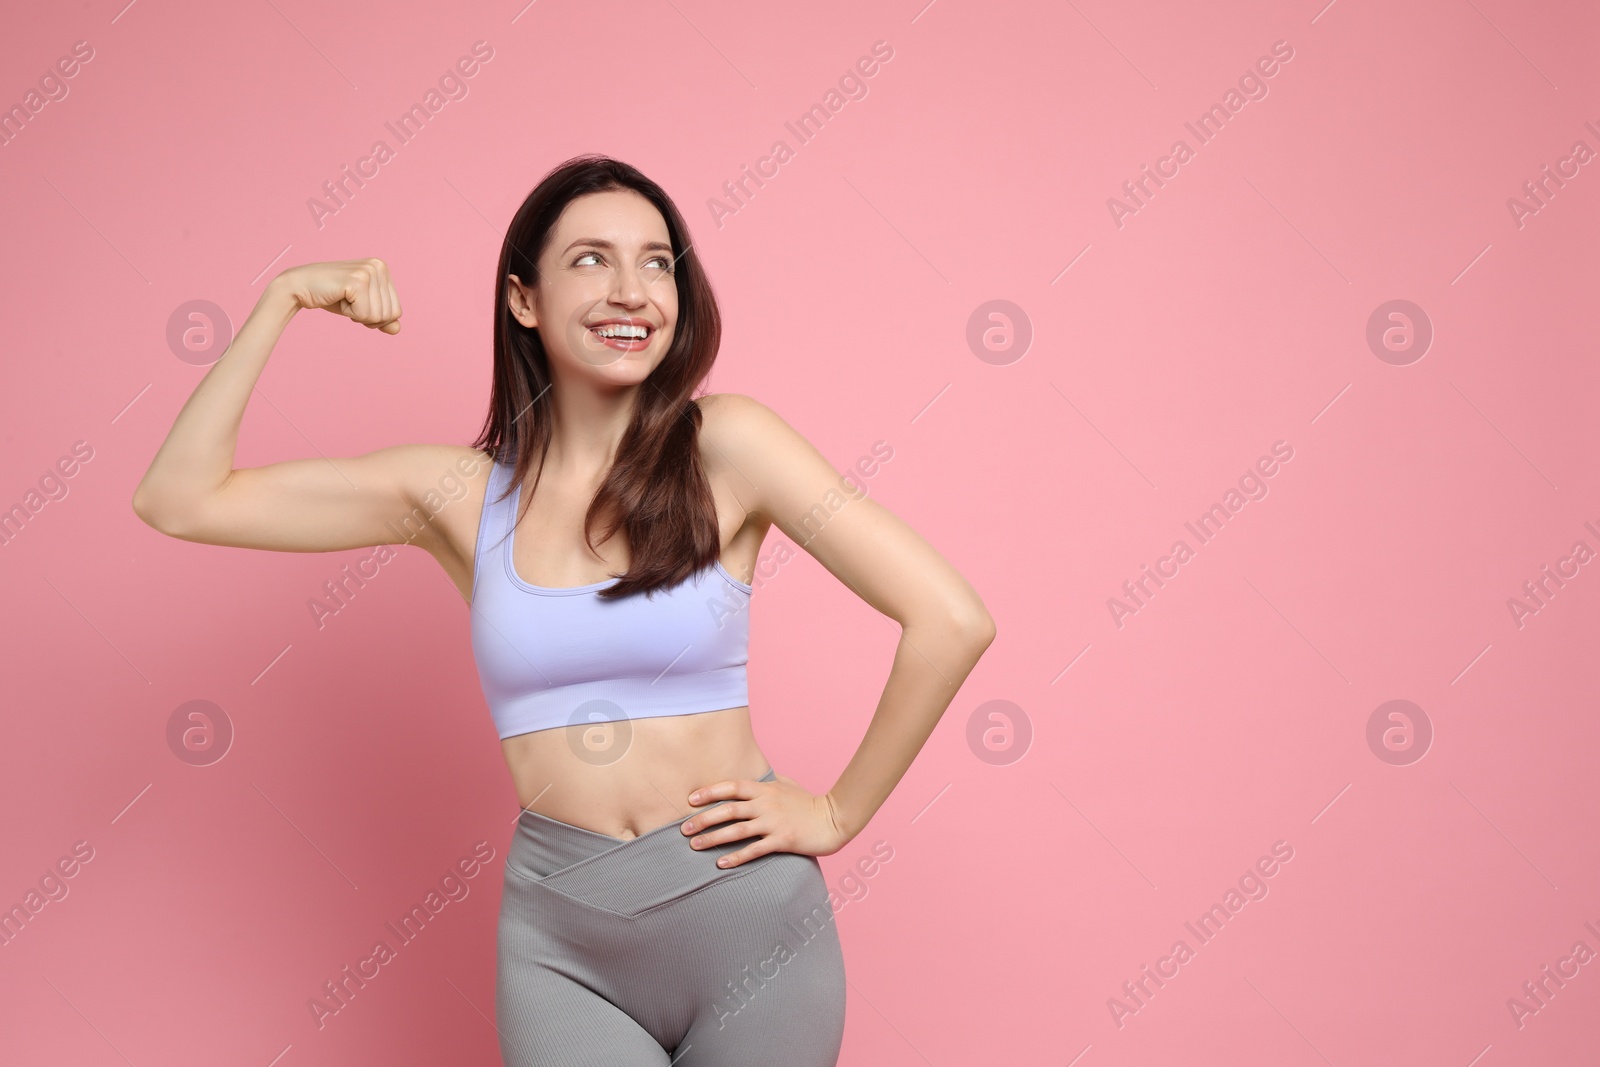 Photo of Happy young woman with slim body showing her muscles on pink background, space for text